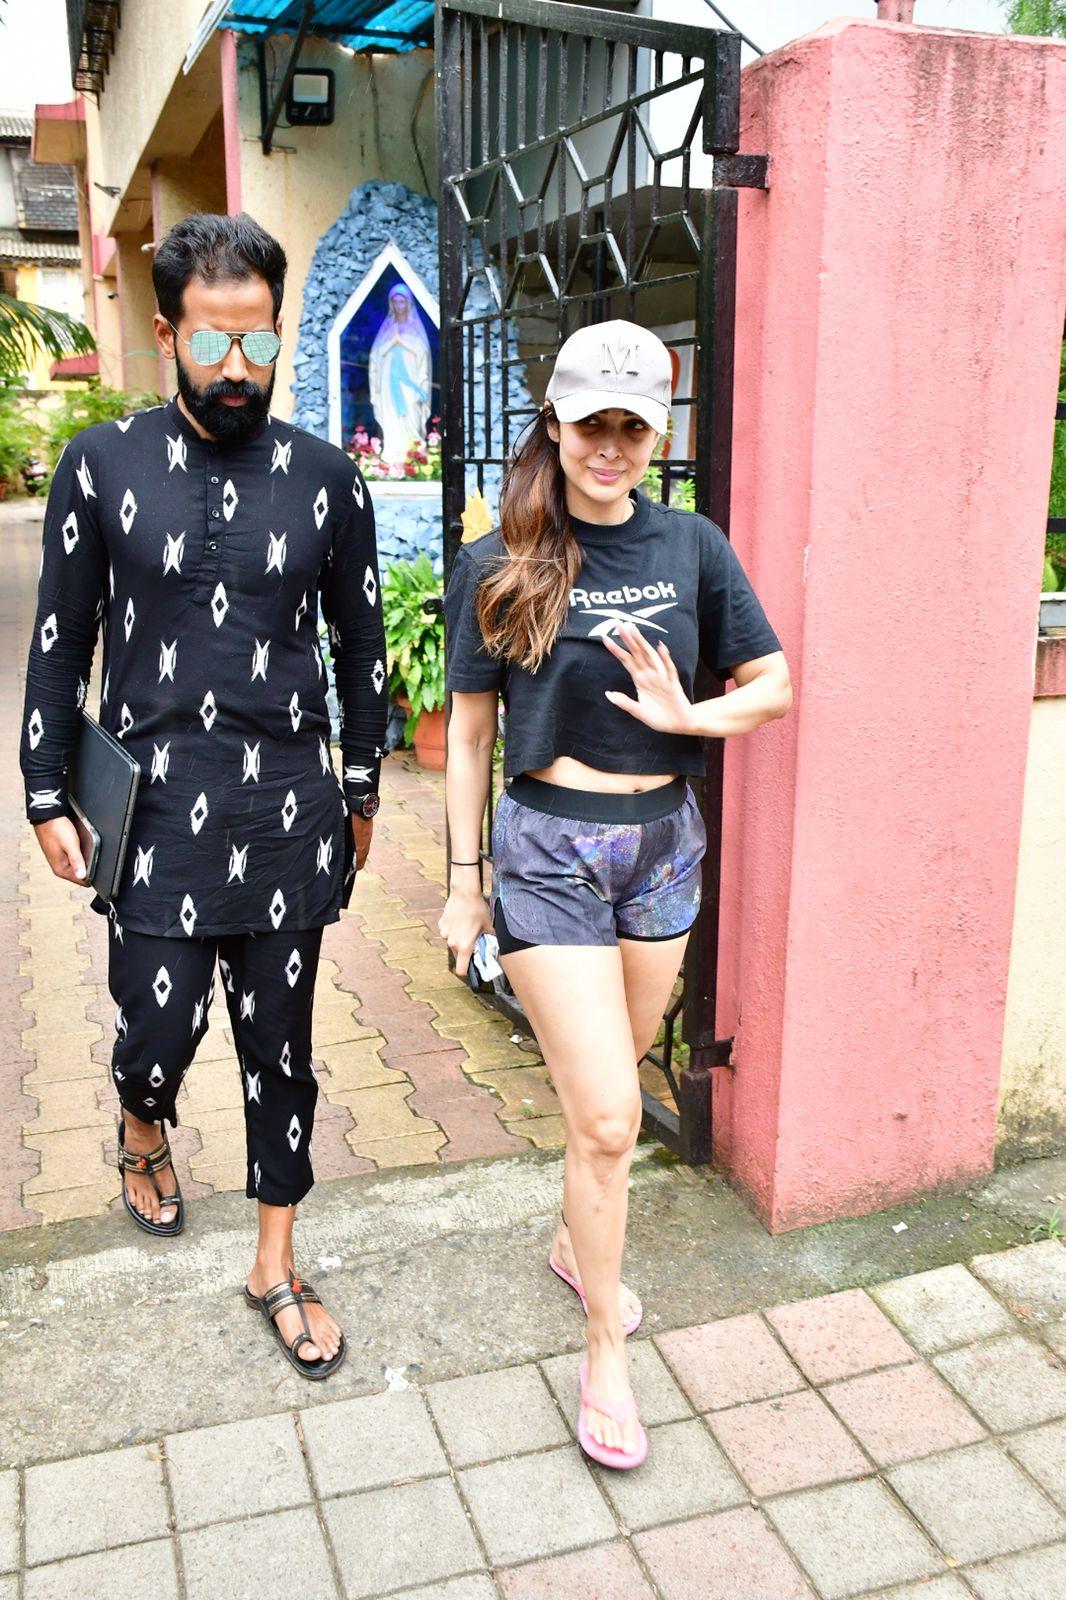 Malaika Arora was spotted outside a Yoga studio today, walking with a friend